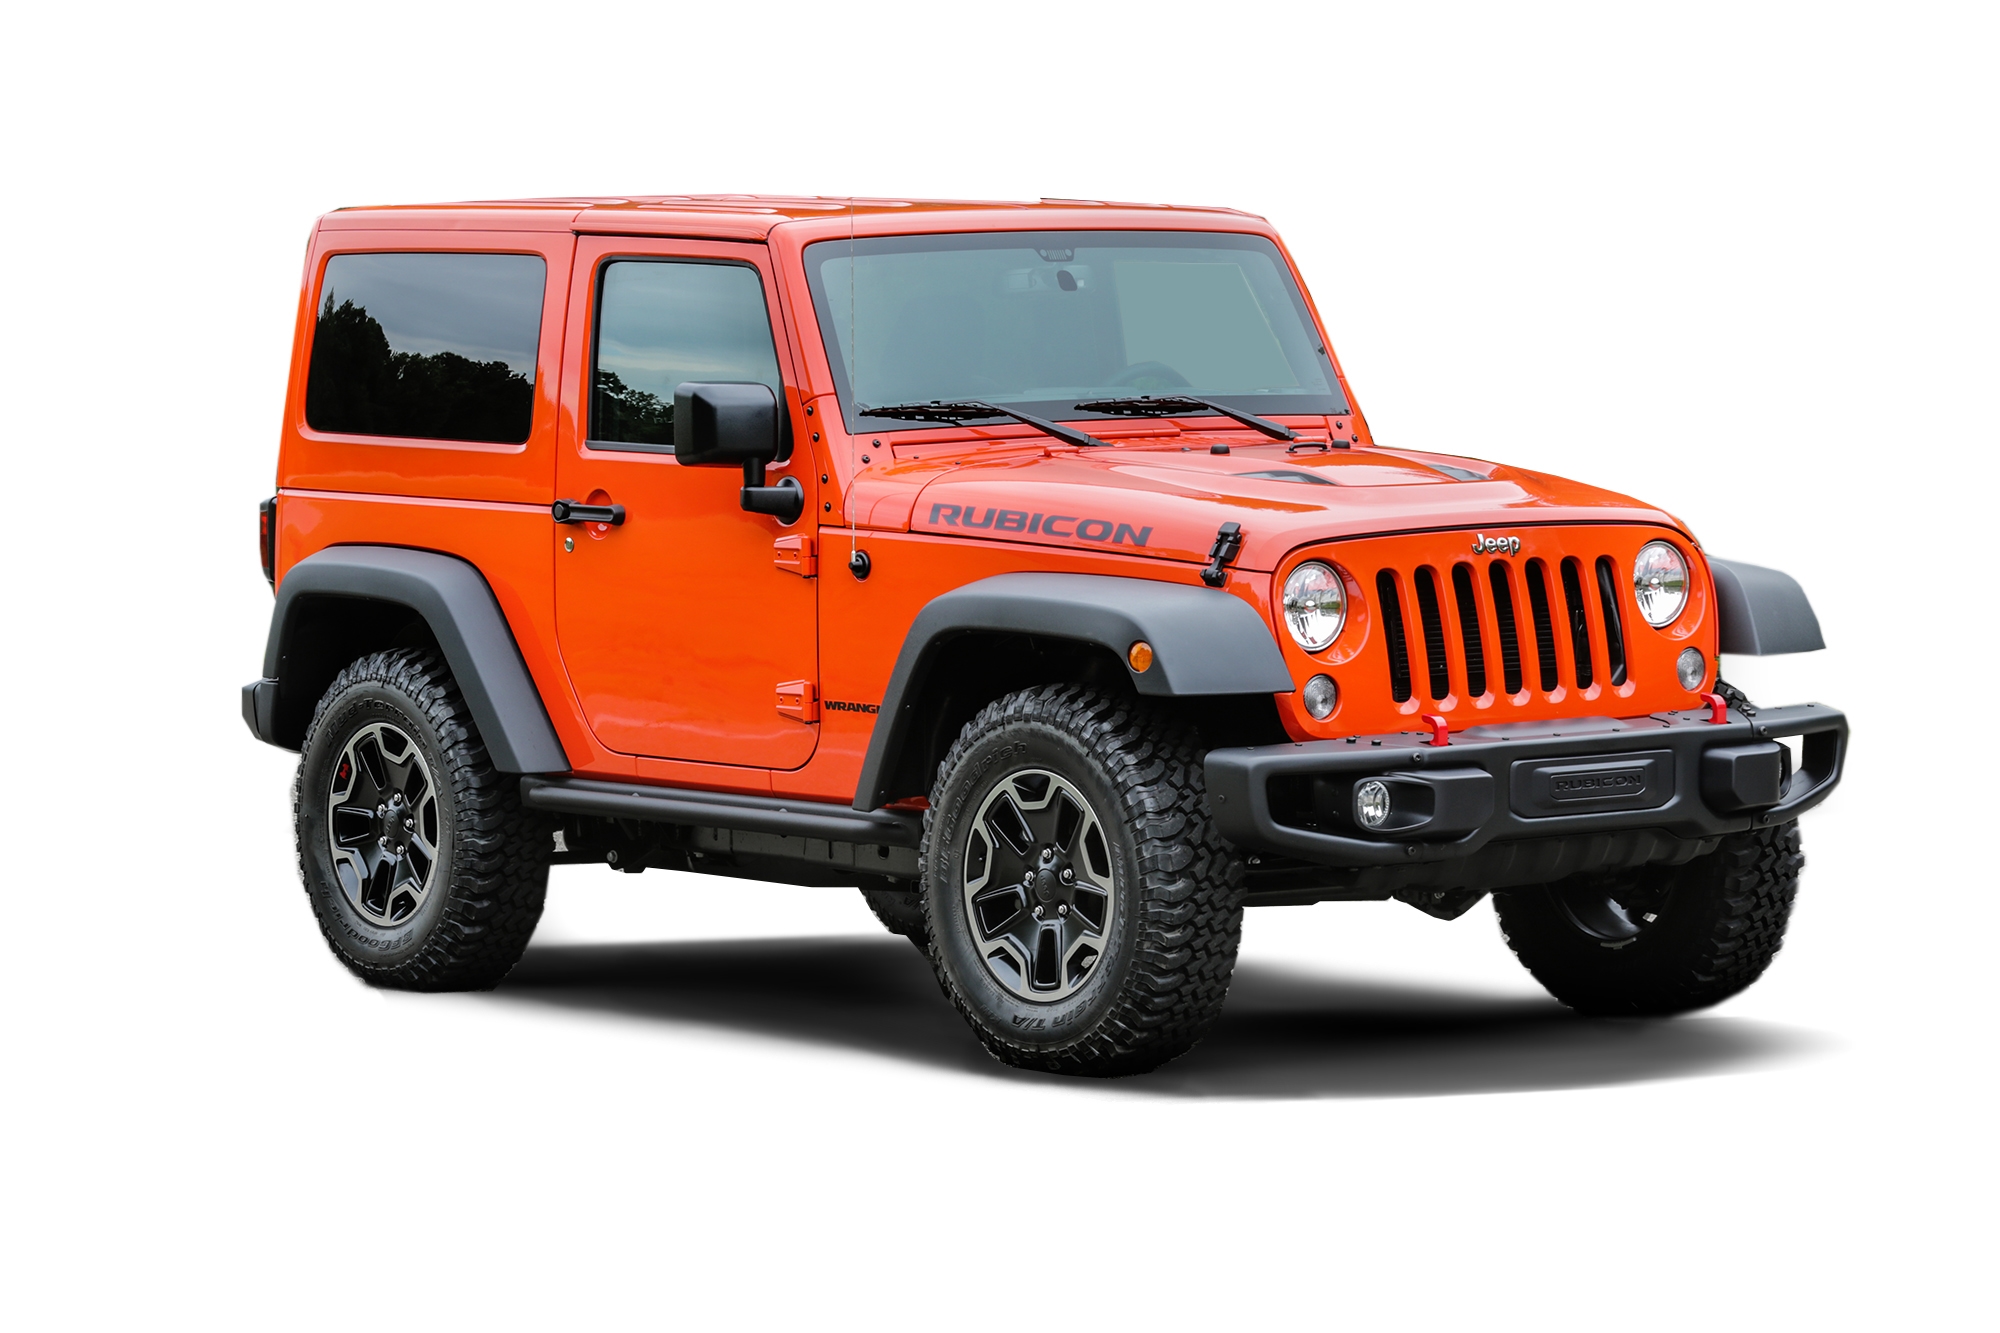 2018 Jeep Wrangler JK Willys Wheeler W Full Specs Features and Price 